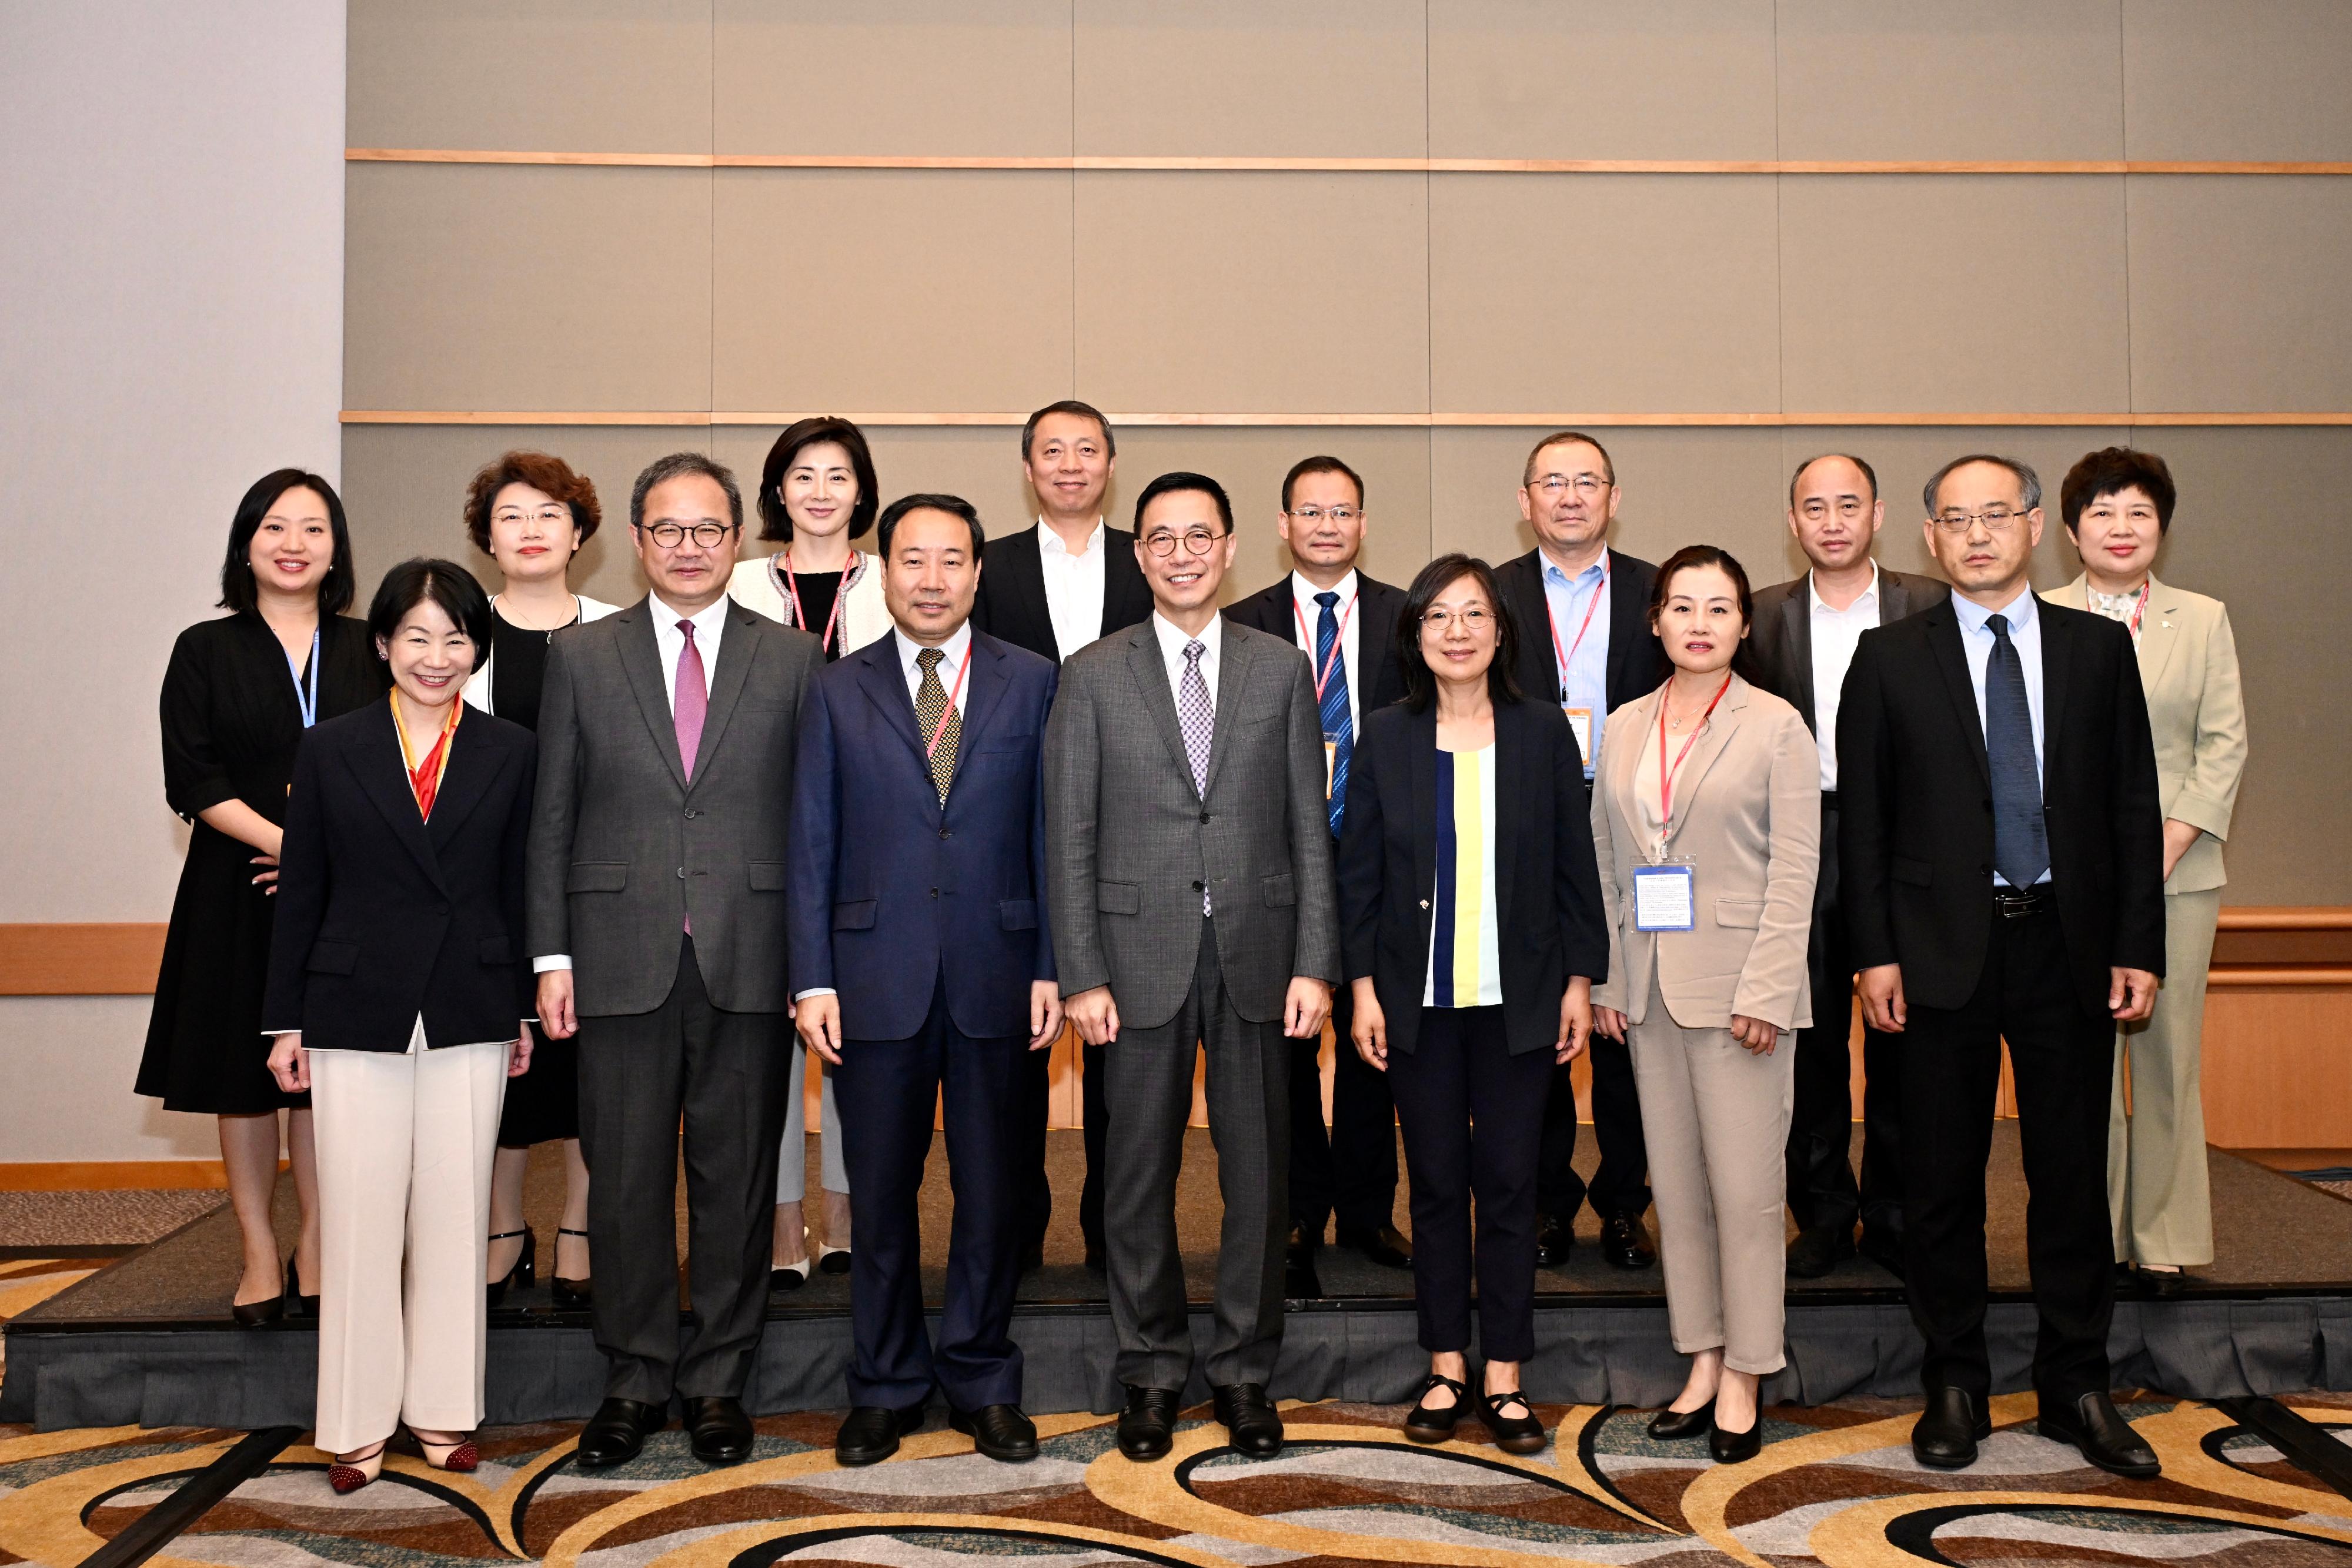 The Secretary for Culture, Sports and Tourism, Mr Kevin Yeung (front row, centre), today (June 15) met with leaders of the cultural and tourism authorities from various Mainland provinces, cities and autonomous regions, who visited Hong Kong to join the International Travel Expo in Hong Kong. Photo shows Inspector at Level 2 of the Department of Hong Kong, Macao and Taiwan Affairs of the Ministry of Culture and Tourism of the People's Republic of China Ms Cui Suxiang (front row, third right) and the Director of the Asia Tourism Exchange Center, Mr Zhang Dong (front row, third left).